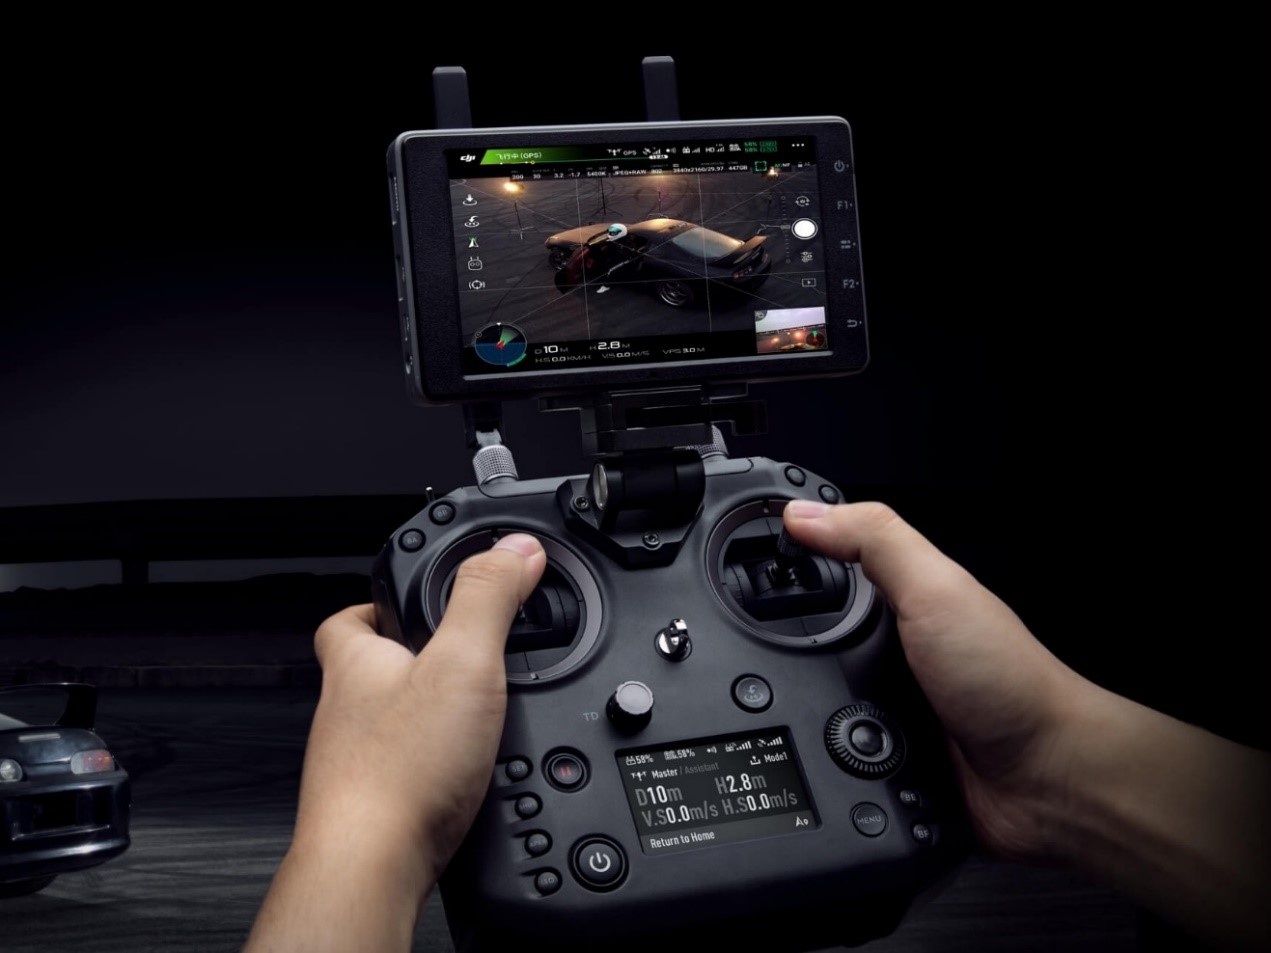 Photo of the DJI Cendence controller, with the CrystalSky monitor mounted on (Source: DJI)